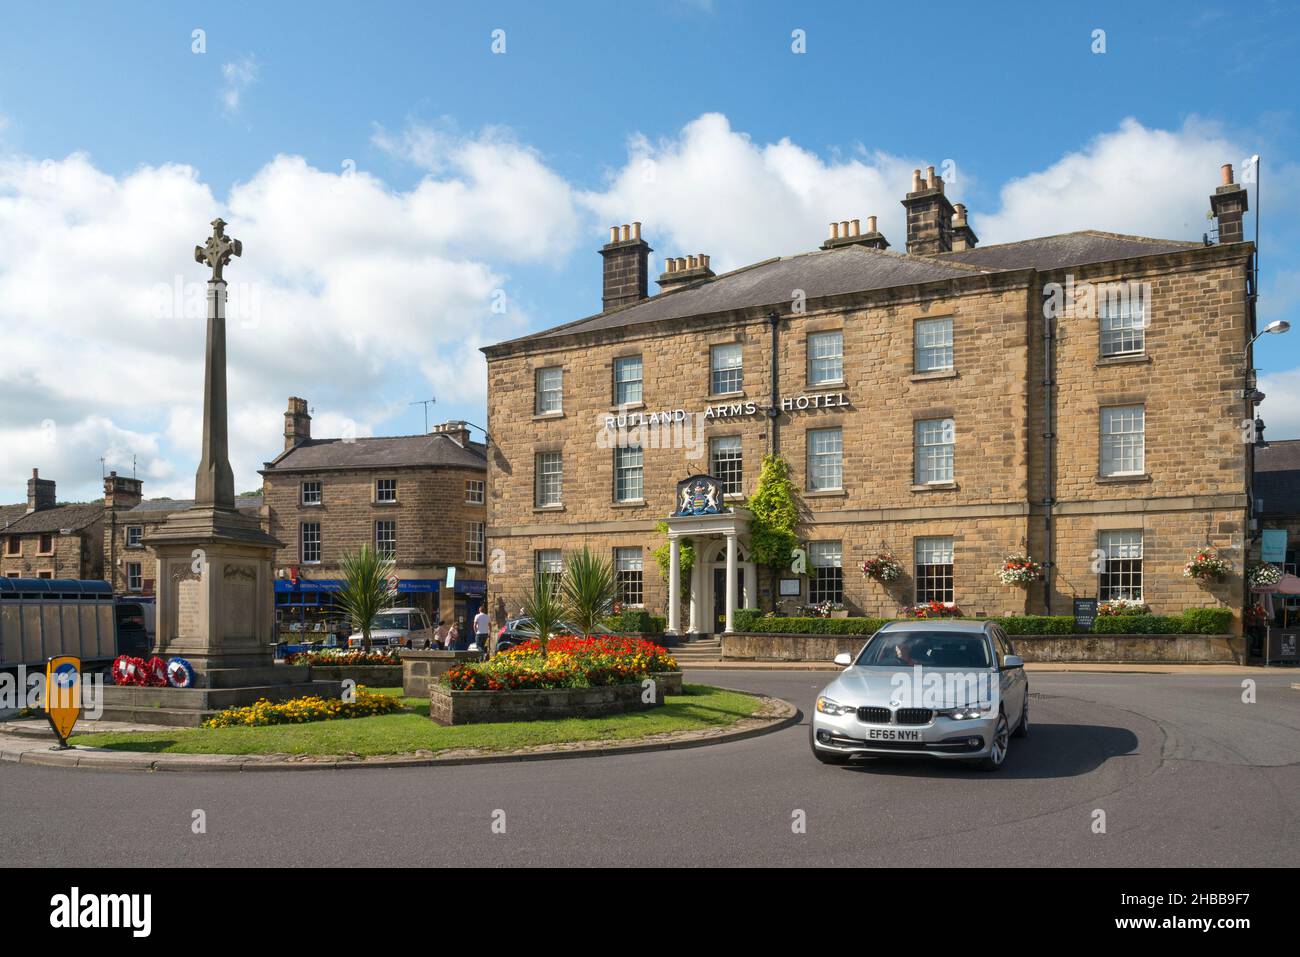 Rutland Arms Hotel, Bakewell, Derbyshire Stock Photo